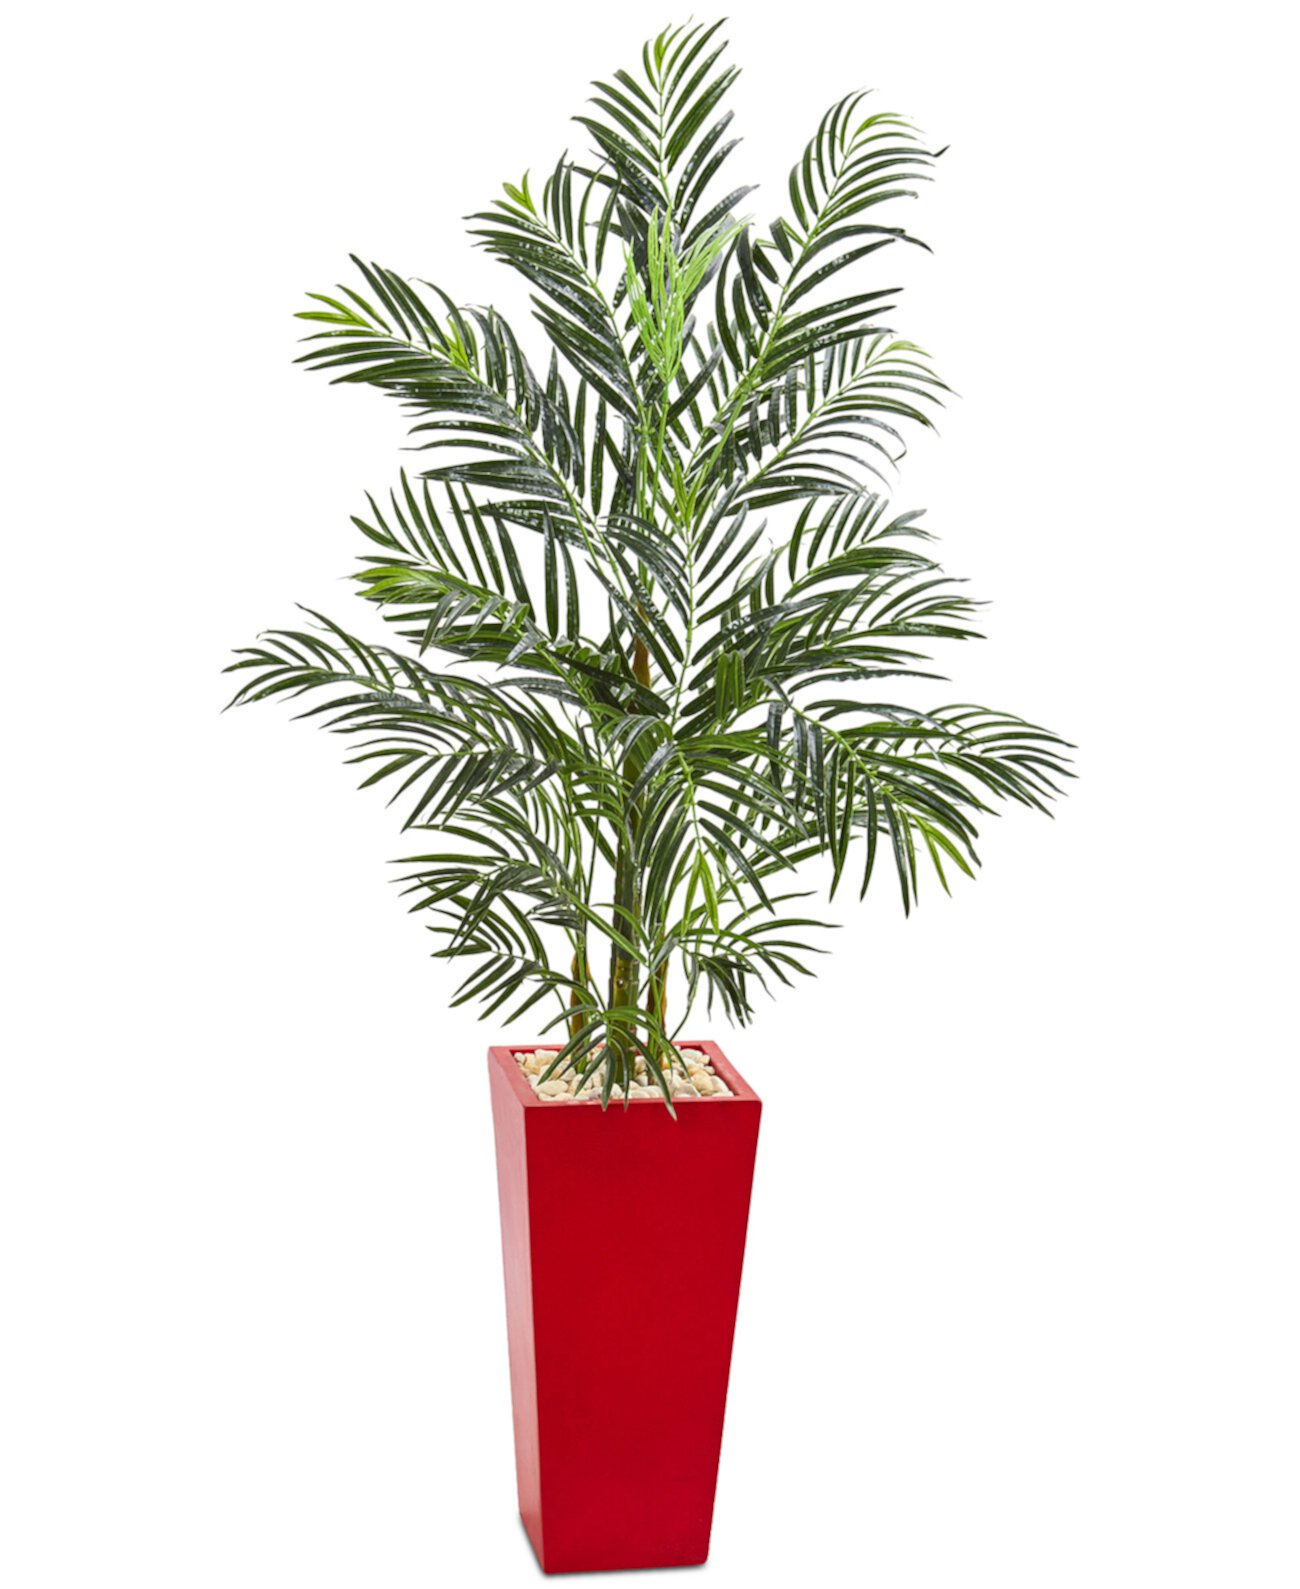 5' Areca Palm Artificial Tree in Red Planter NEARLY NATURAL